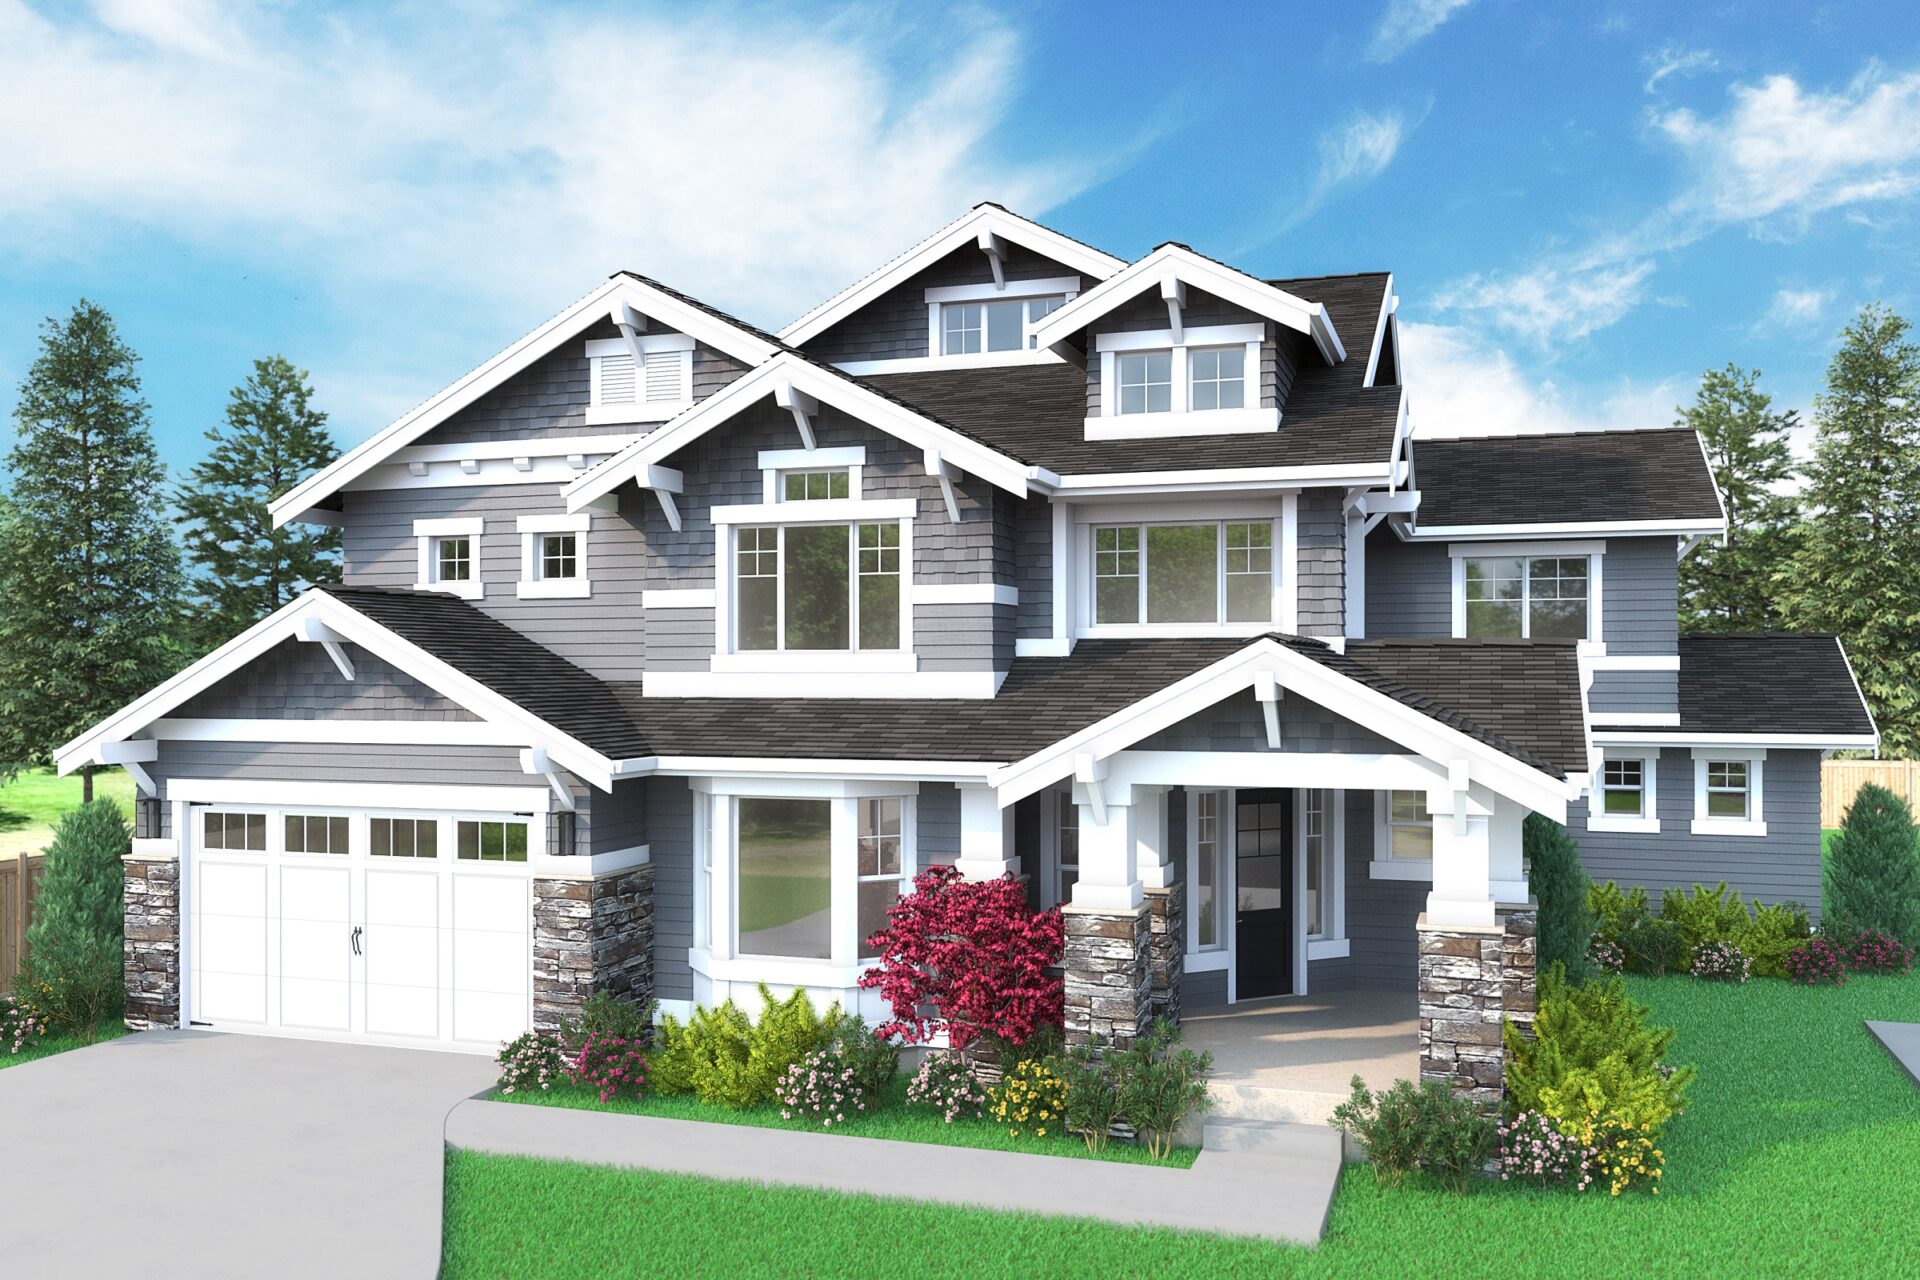 View our new luxury home construction on 13918 NE 4th Ct, in Bellevue, WA from MN Custom Homes